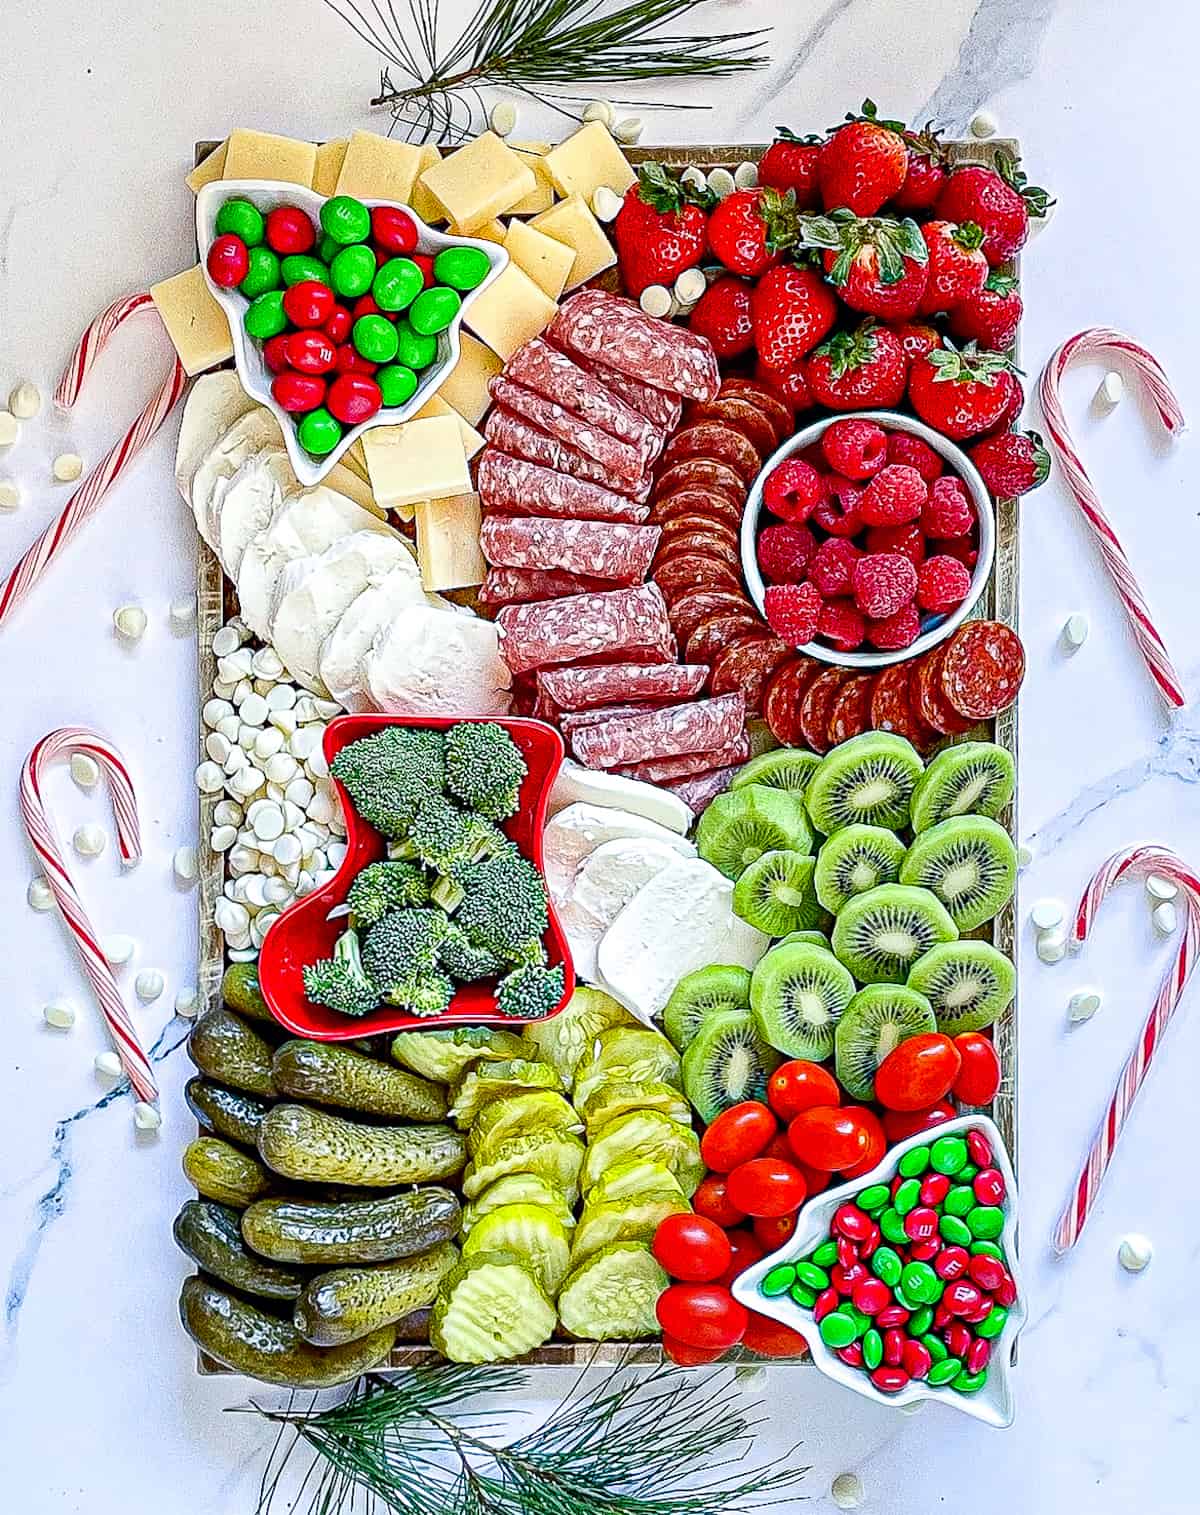 Christmas charcuterie board with red, white, and green fruits, vegetables, meats and cheeses surrounded by candy canes